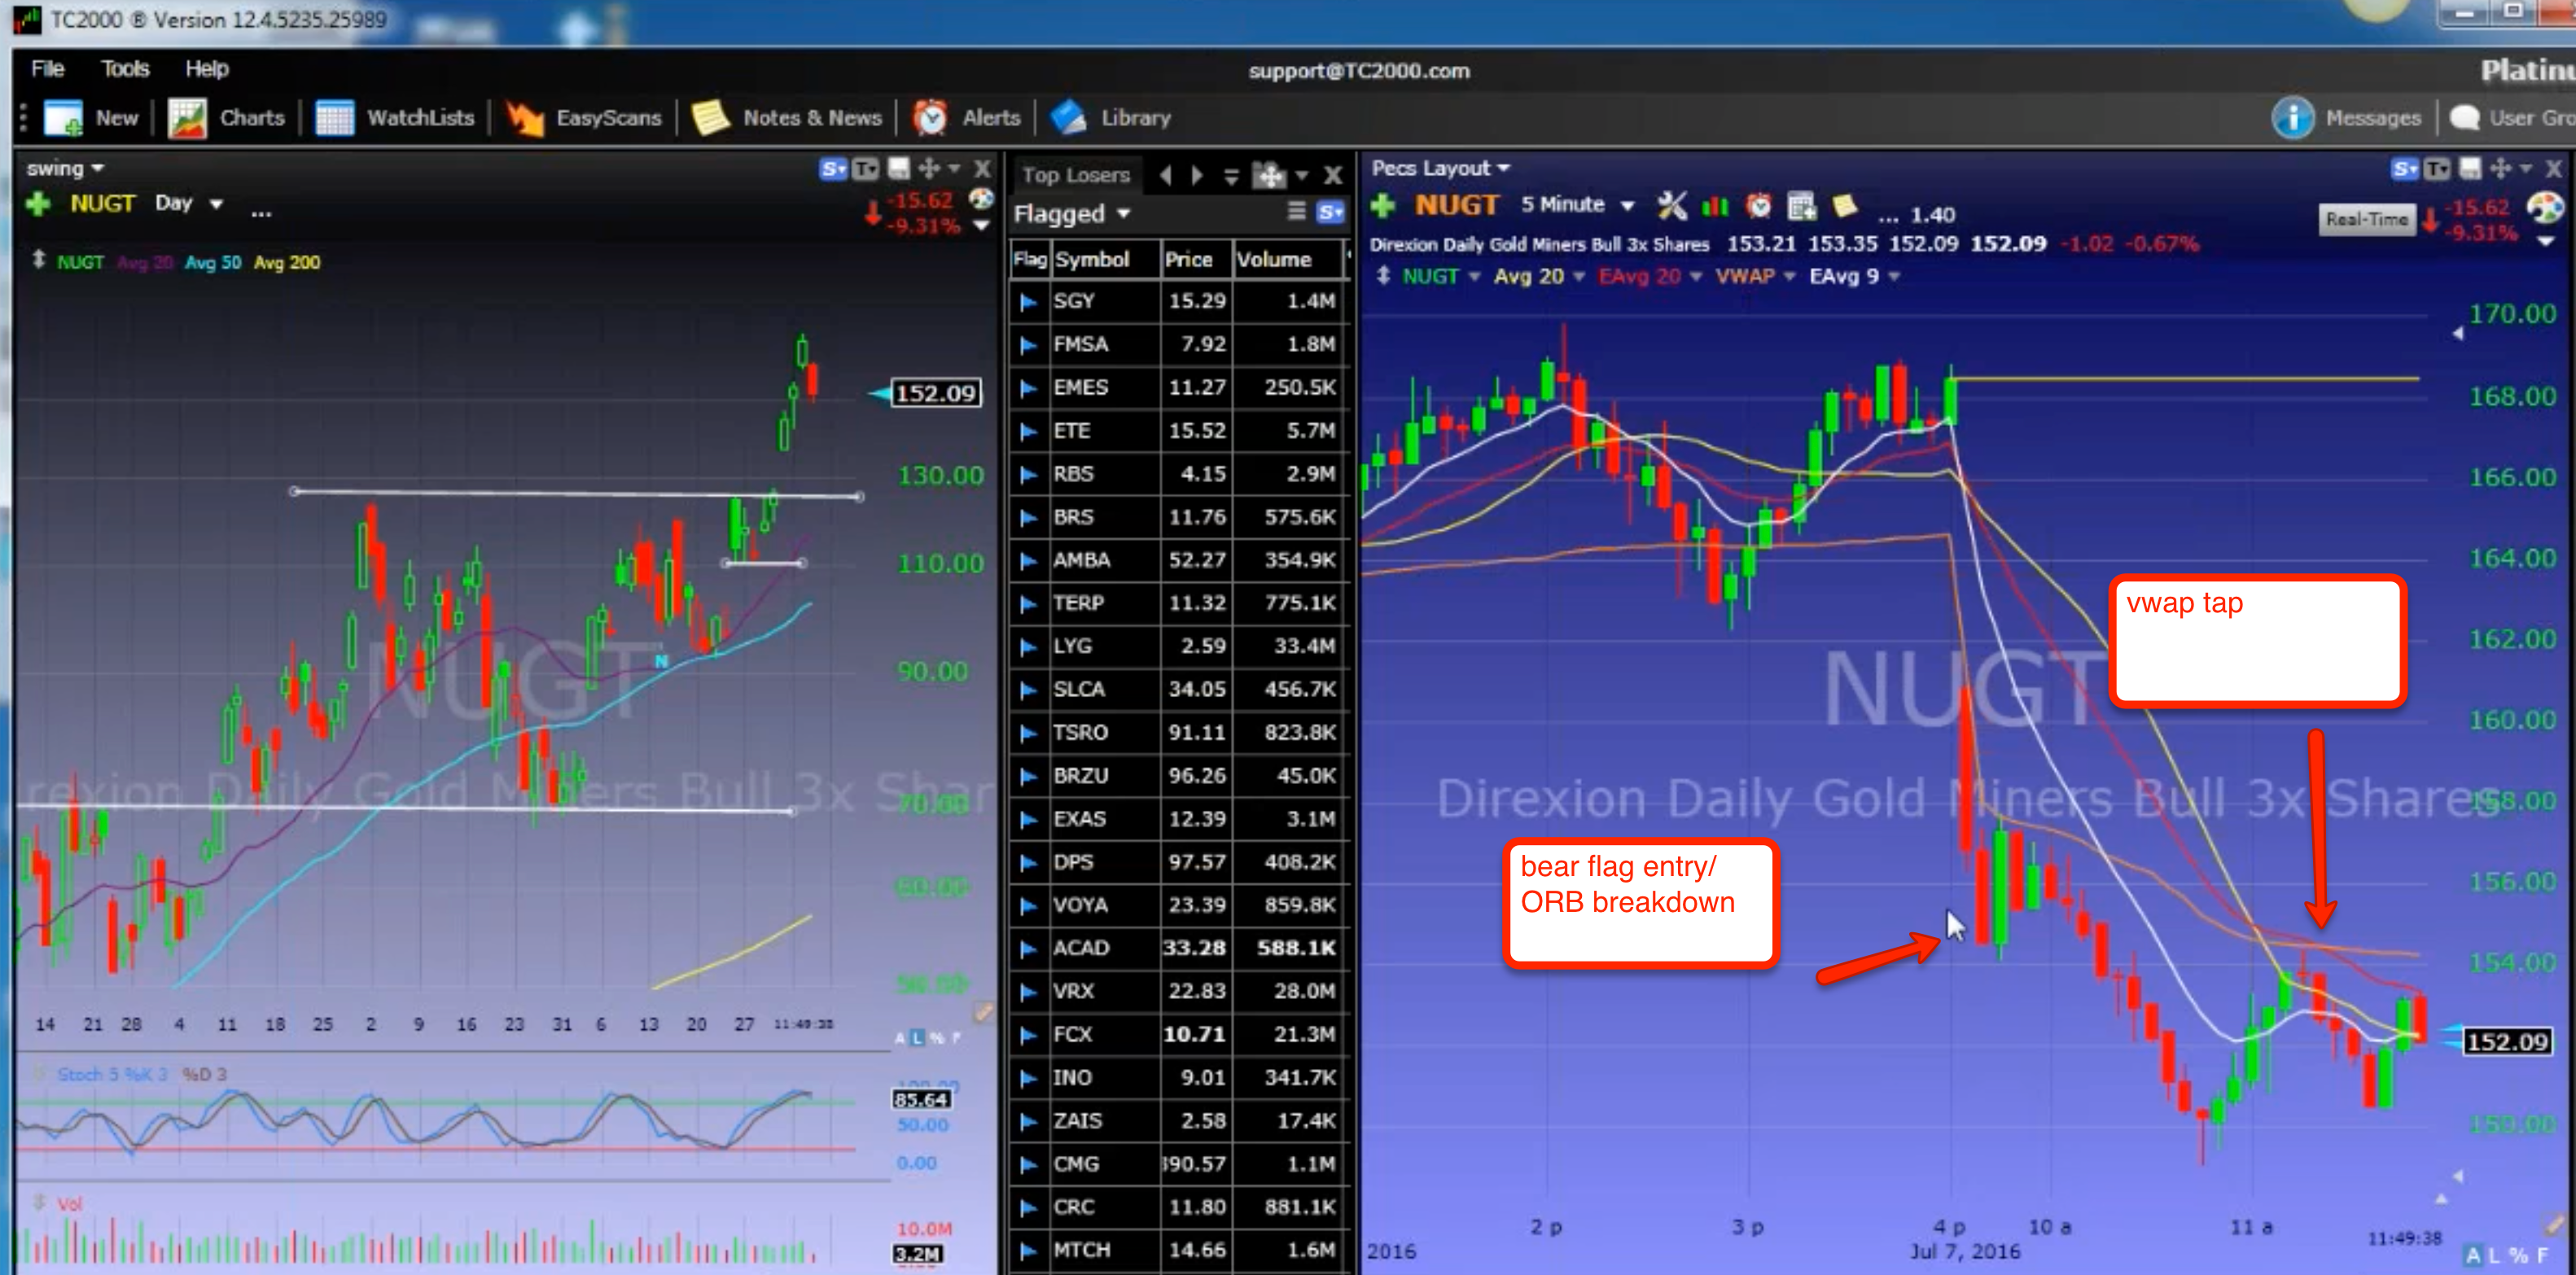 NUGT Gold dips getting bough. Watching for a intraday setup to trade. 